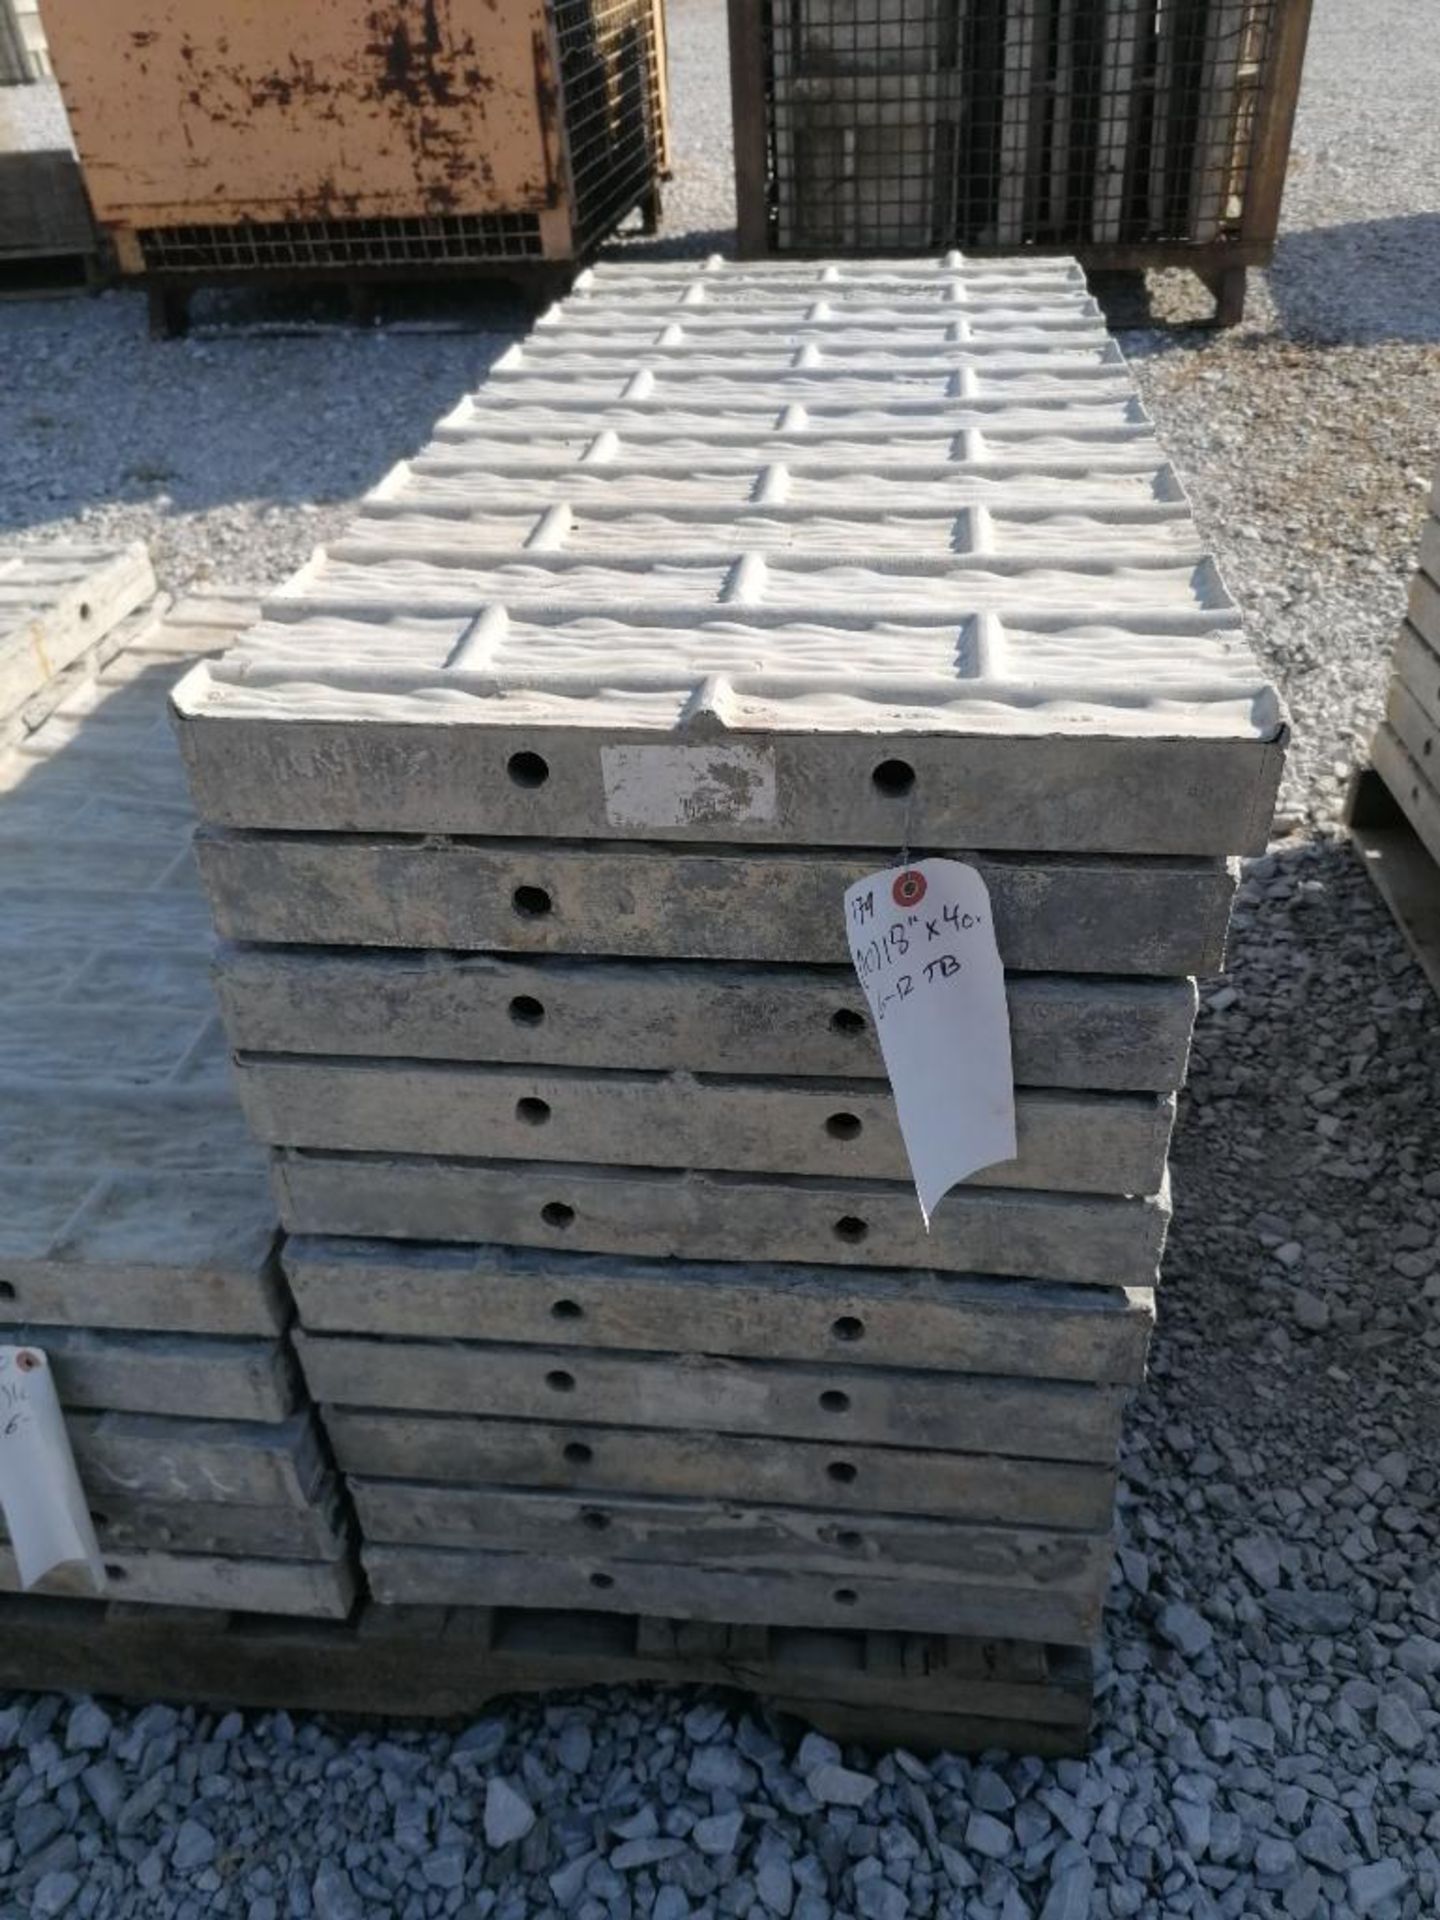 (10) 18" x 40" TUF-N-LITE Textured Brick Aluminum Concrete Forms 6-12 Hole Pattern. Located in